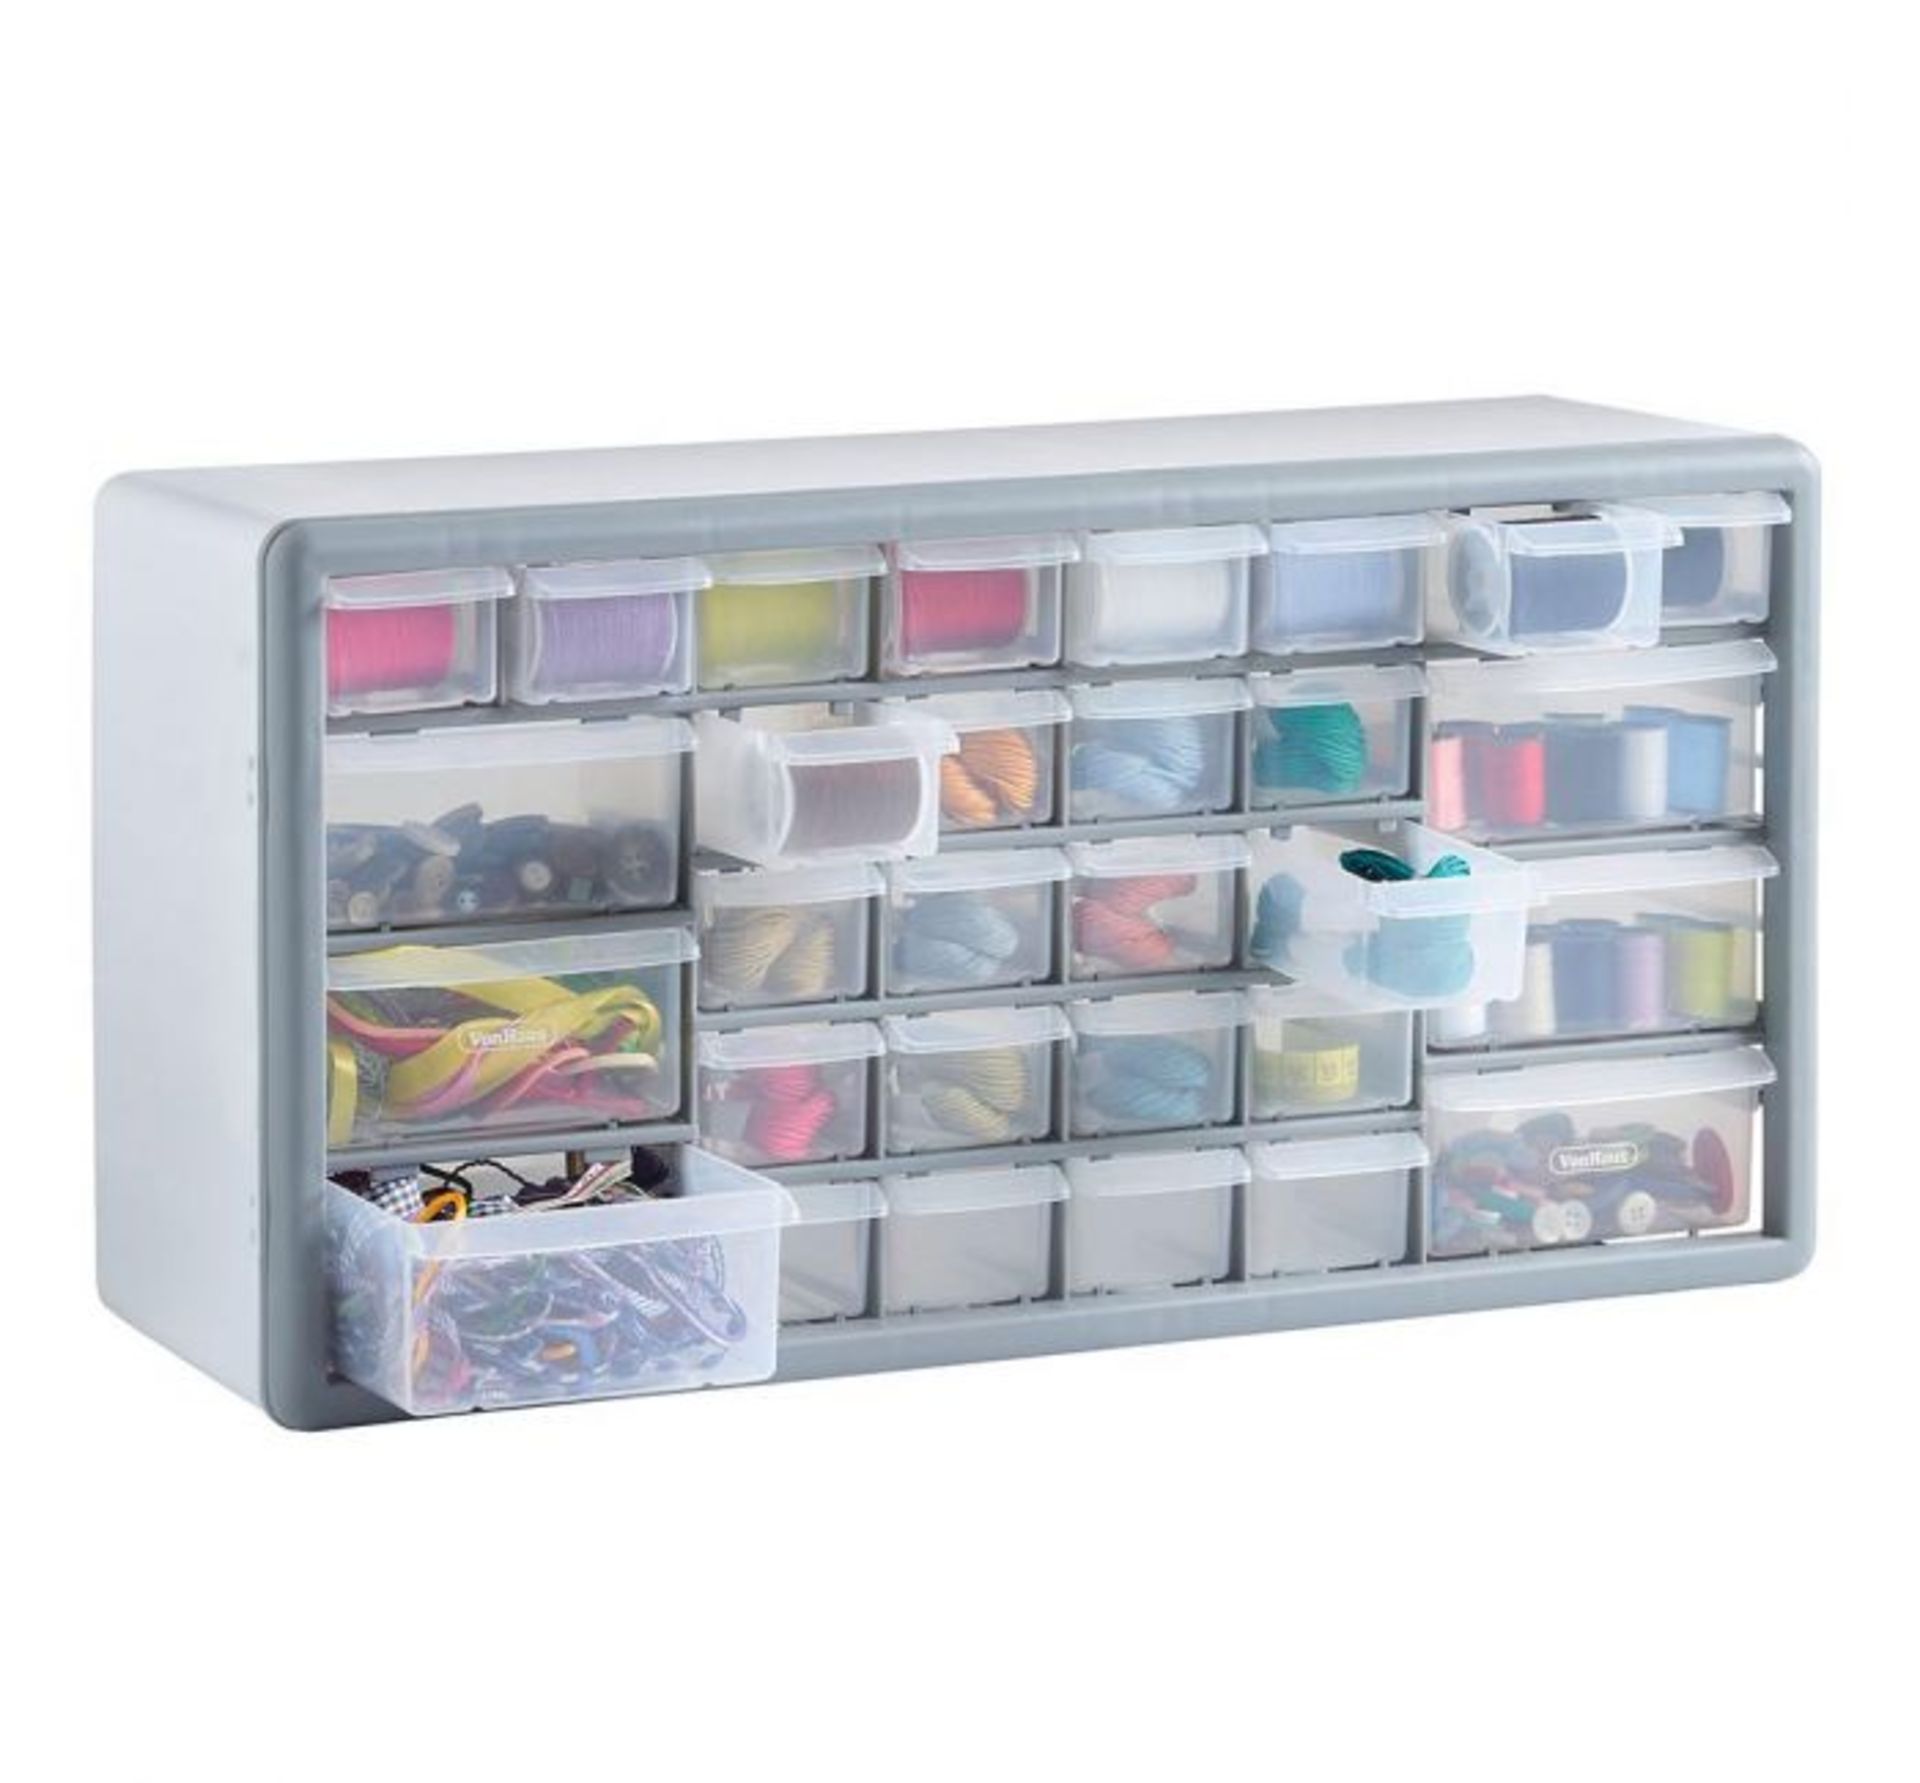 (K21) White 30 Drawer Organiser Perfect for storing small parts such as nuts, bolts, screws, n... - Image 3 of 3